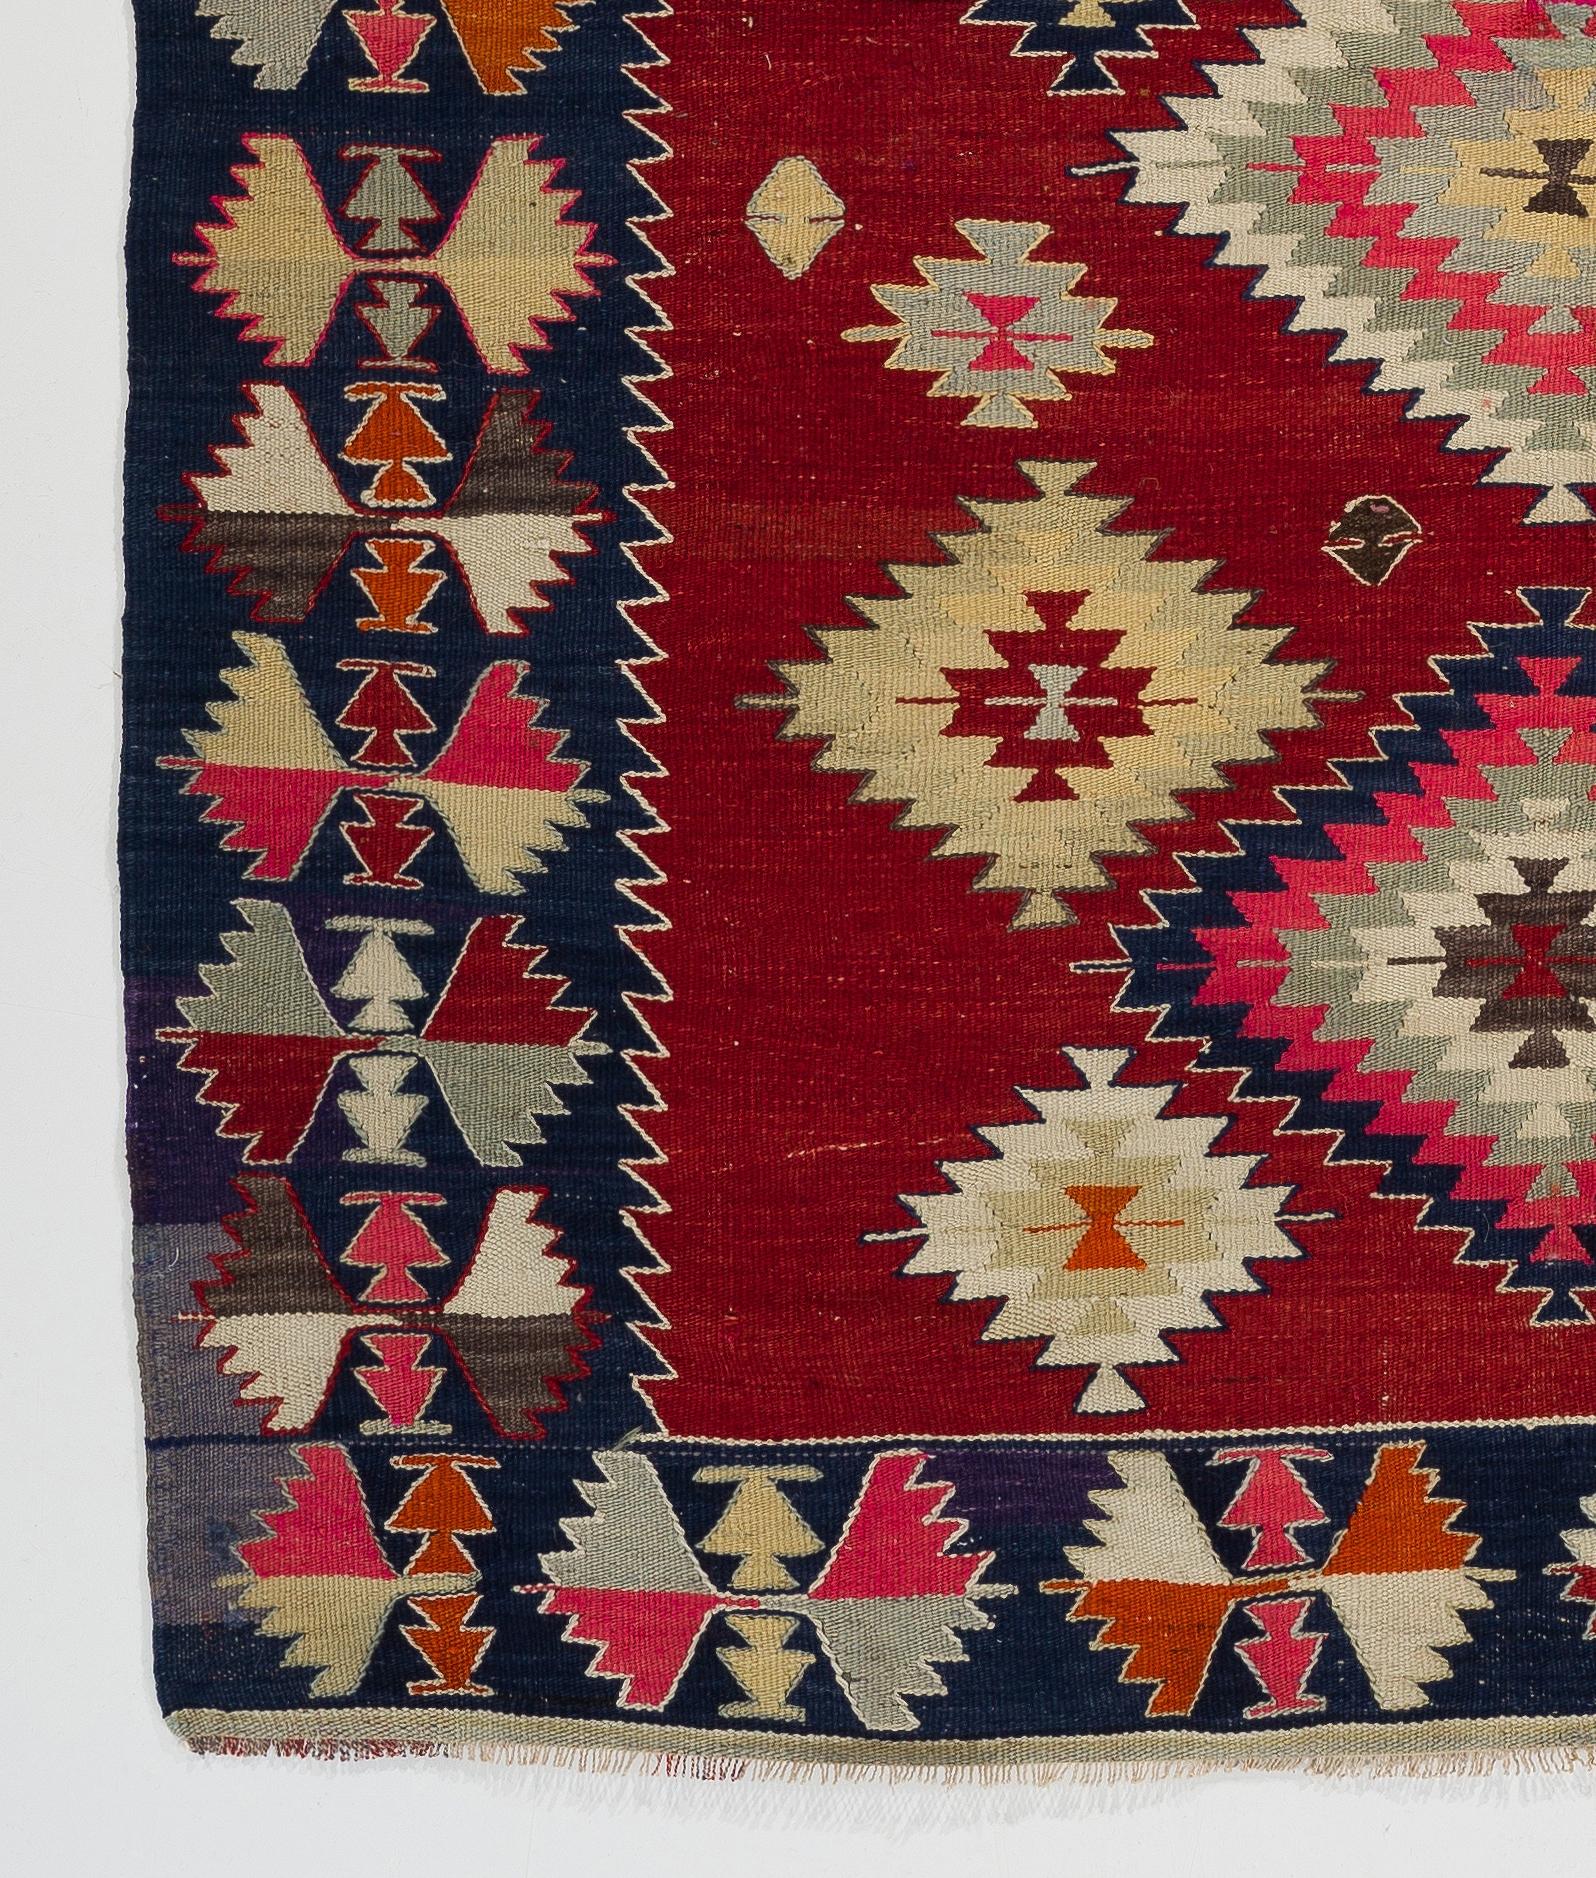 5.8x6.8 Ft Vintage Anatolian Kilim Rug in Red with Geometric Design, 100% Wool In Good Condition For Sale In Philadelphia, PA